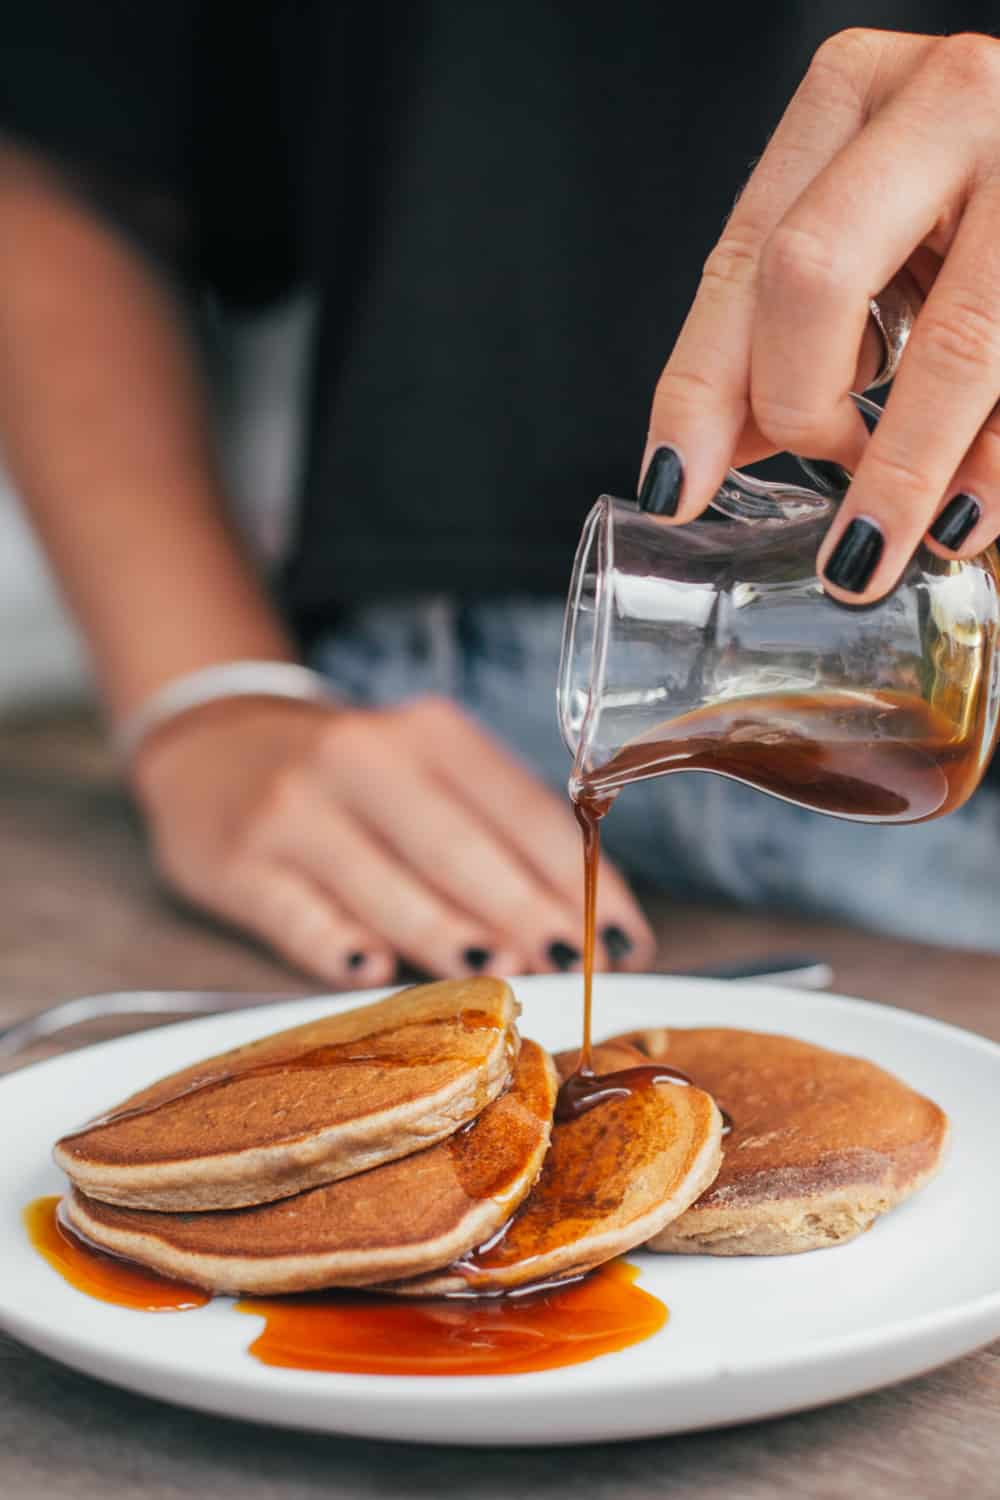 The Risks of Consuming Expired Maple Syrup